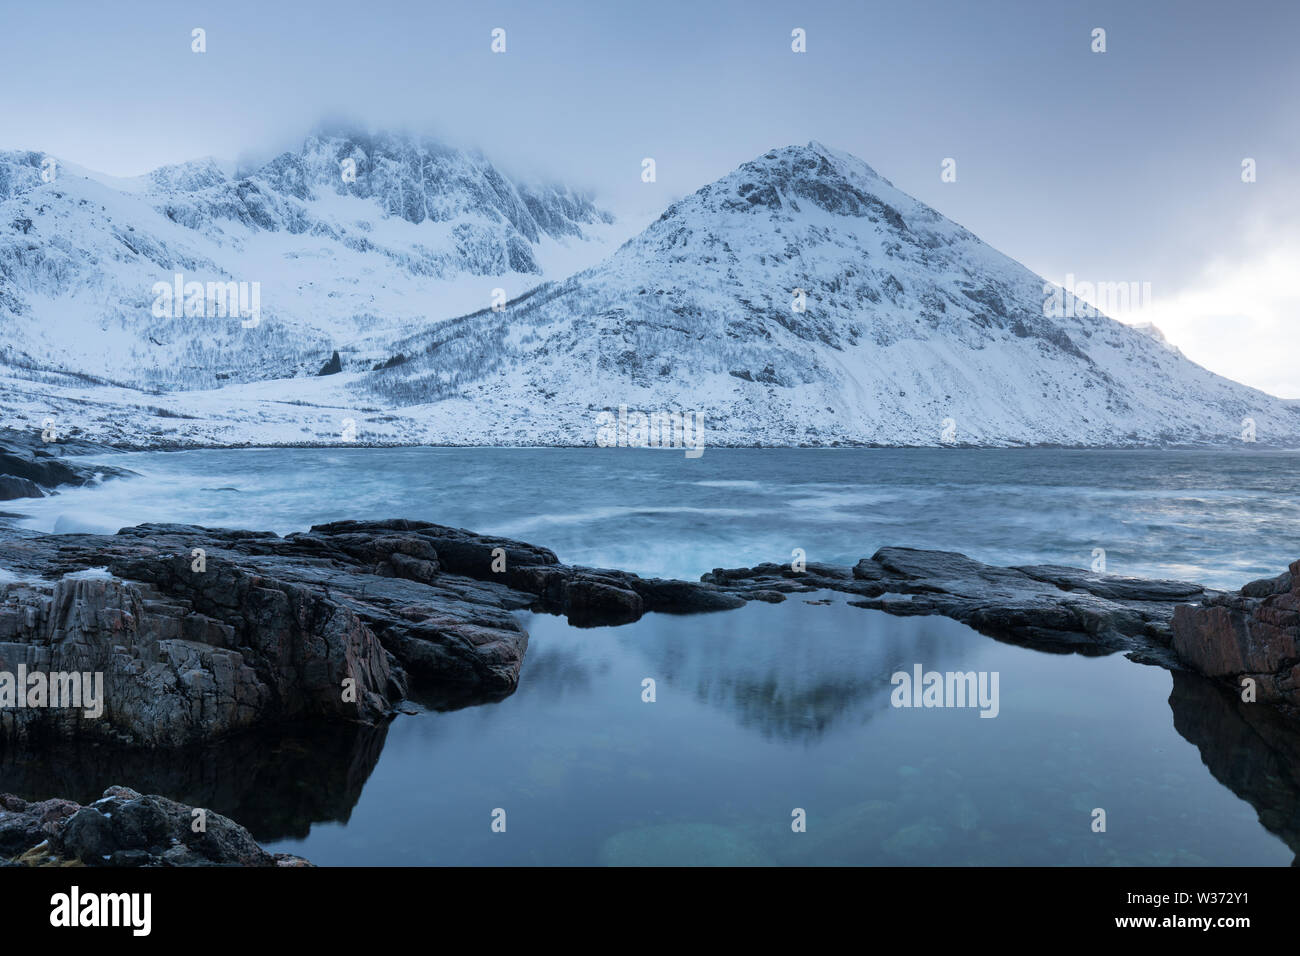 Winter view on Senja island. Cloudy dusk or night in Mountains And Fjords, Winter Landscape, fishing village, Norway Beautiful christmas time, Tromso Stock Photo